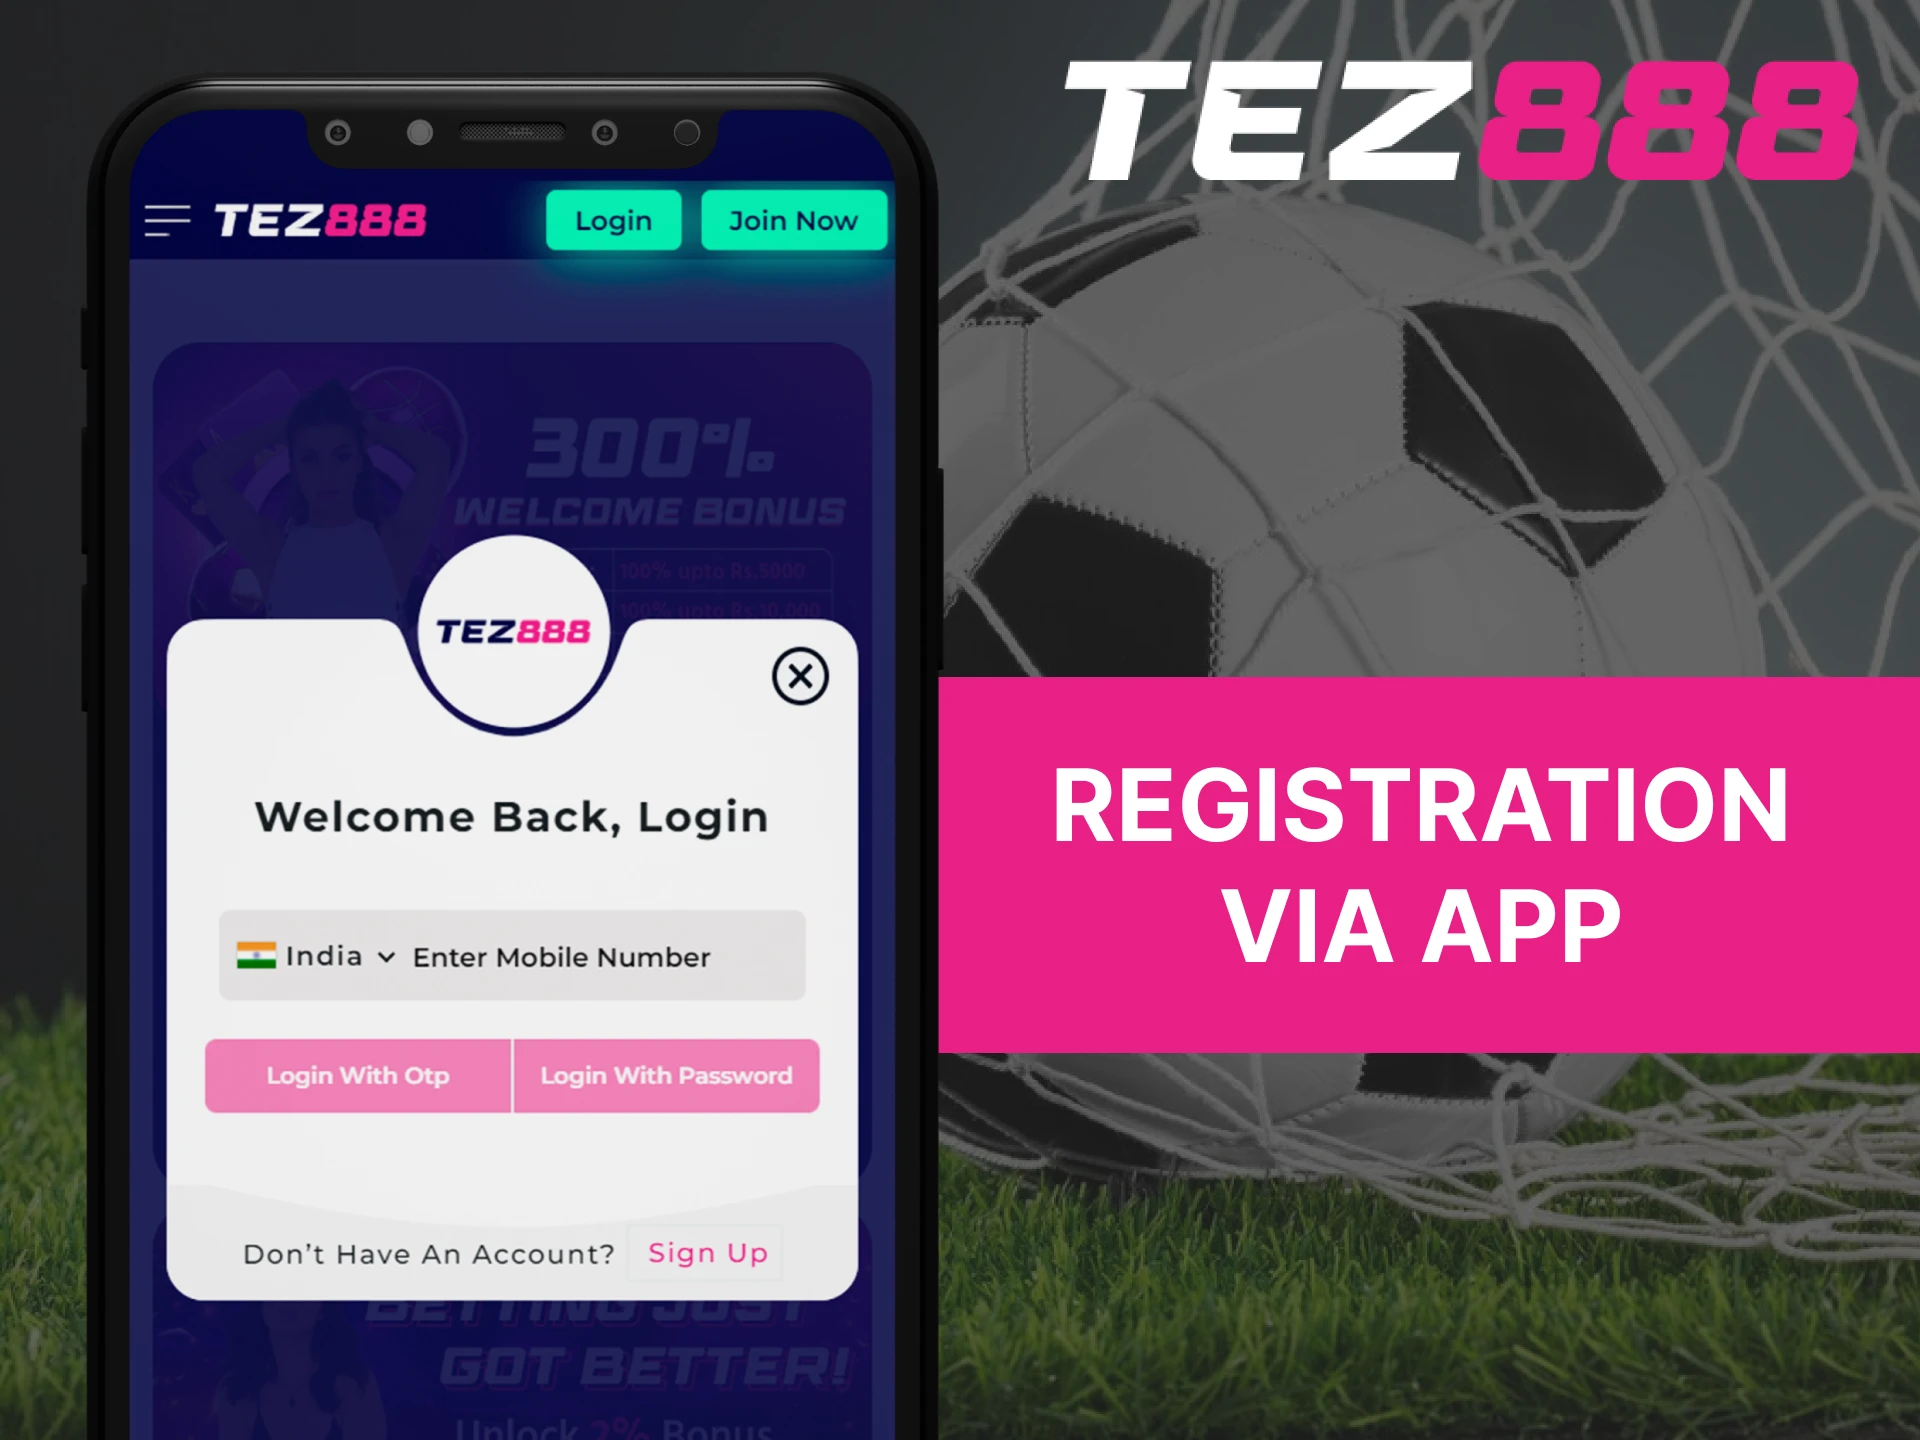 Register in the Tez888 mobile app and start placing bets and playing in the casino.